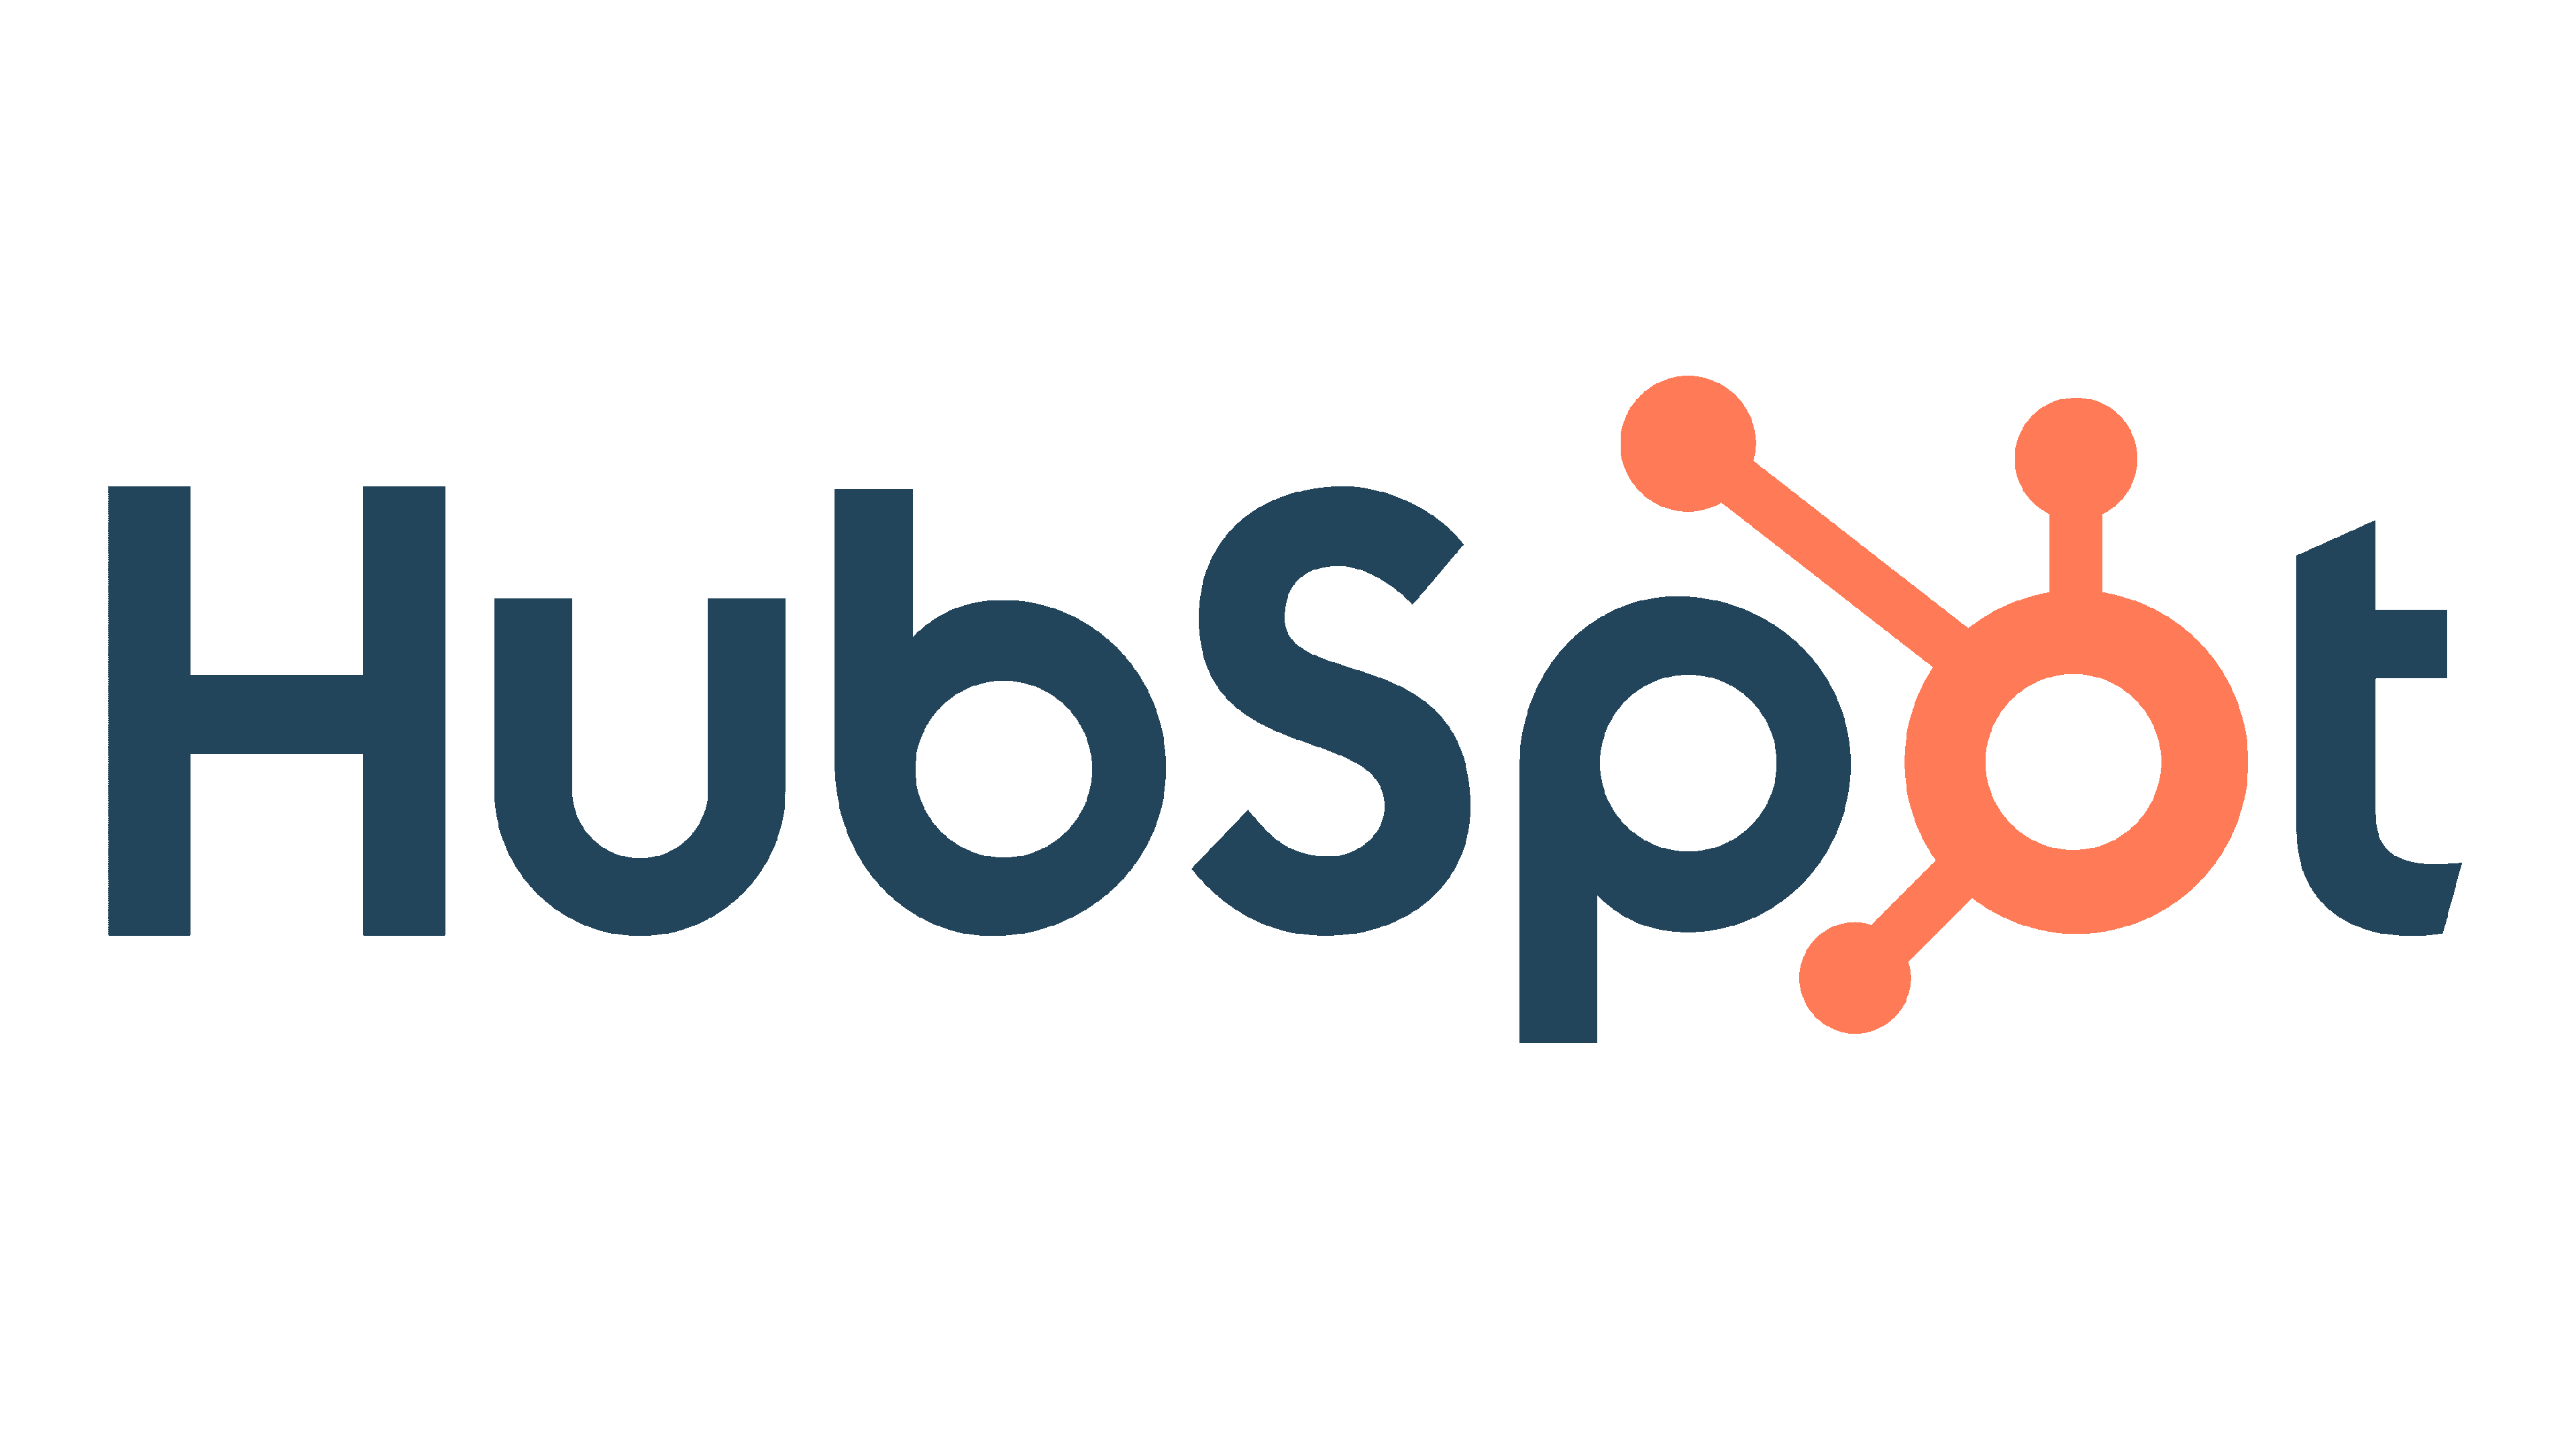 A logo with blue and orange letters with written text of "hubspot"